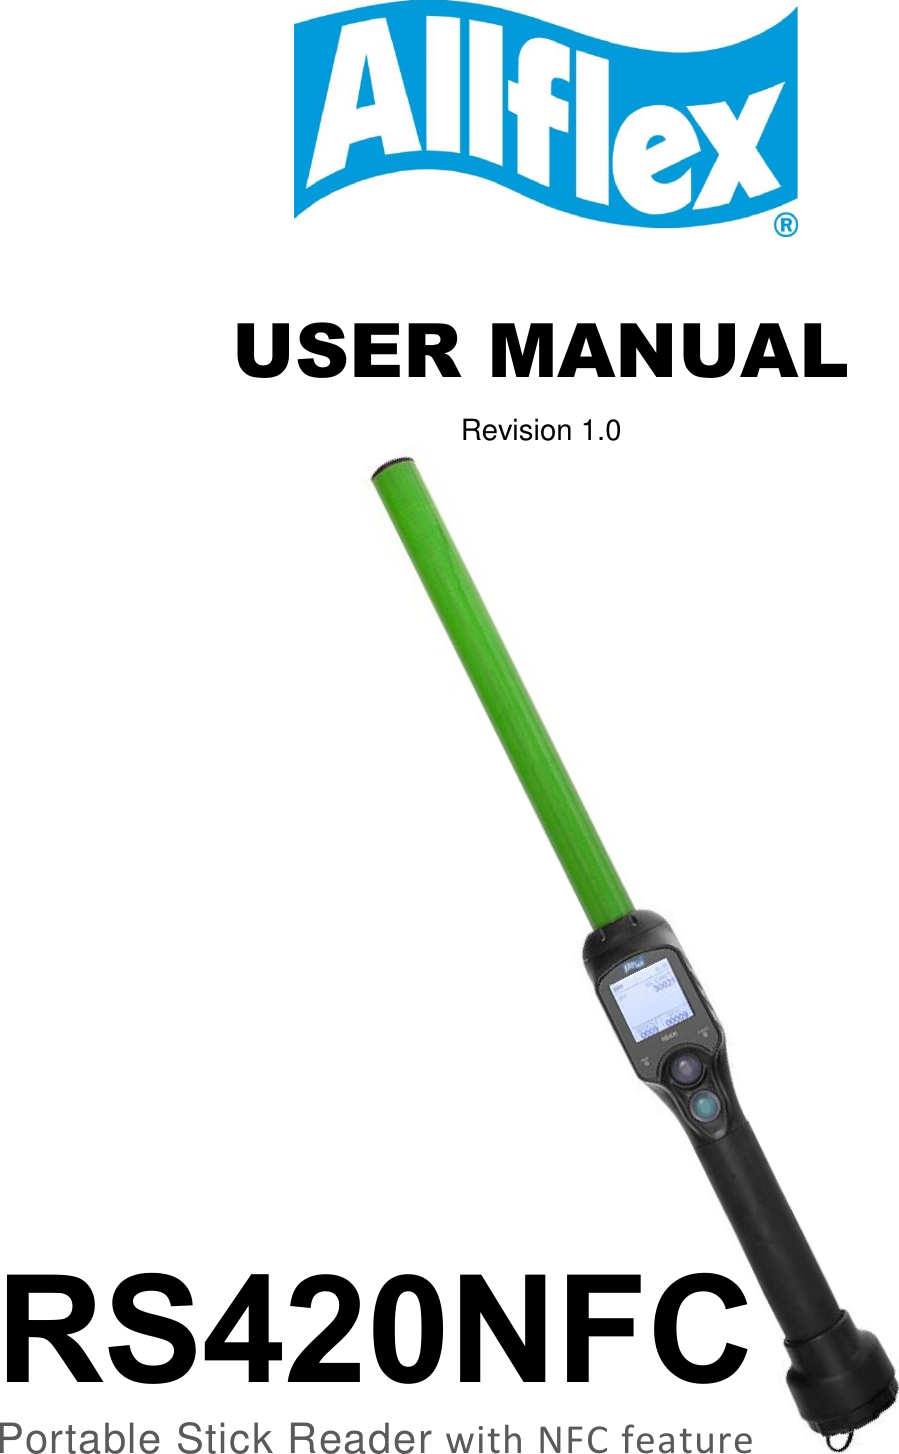     USER MANUAL Revision 1.0                  RS420NFC Portable Stick Reader with NFC feature 